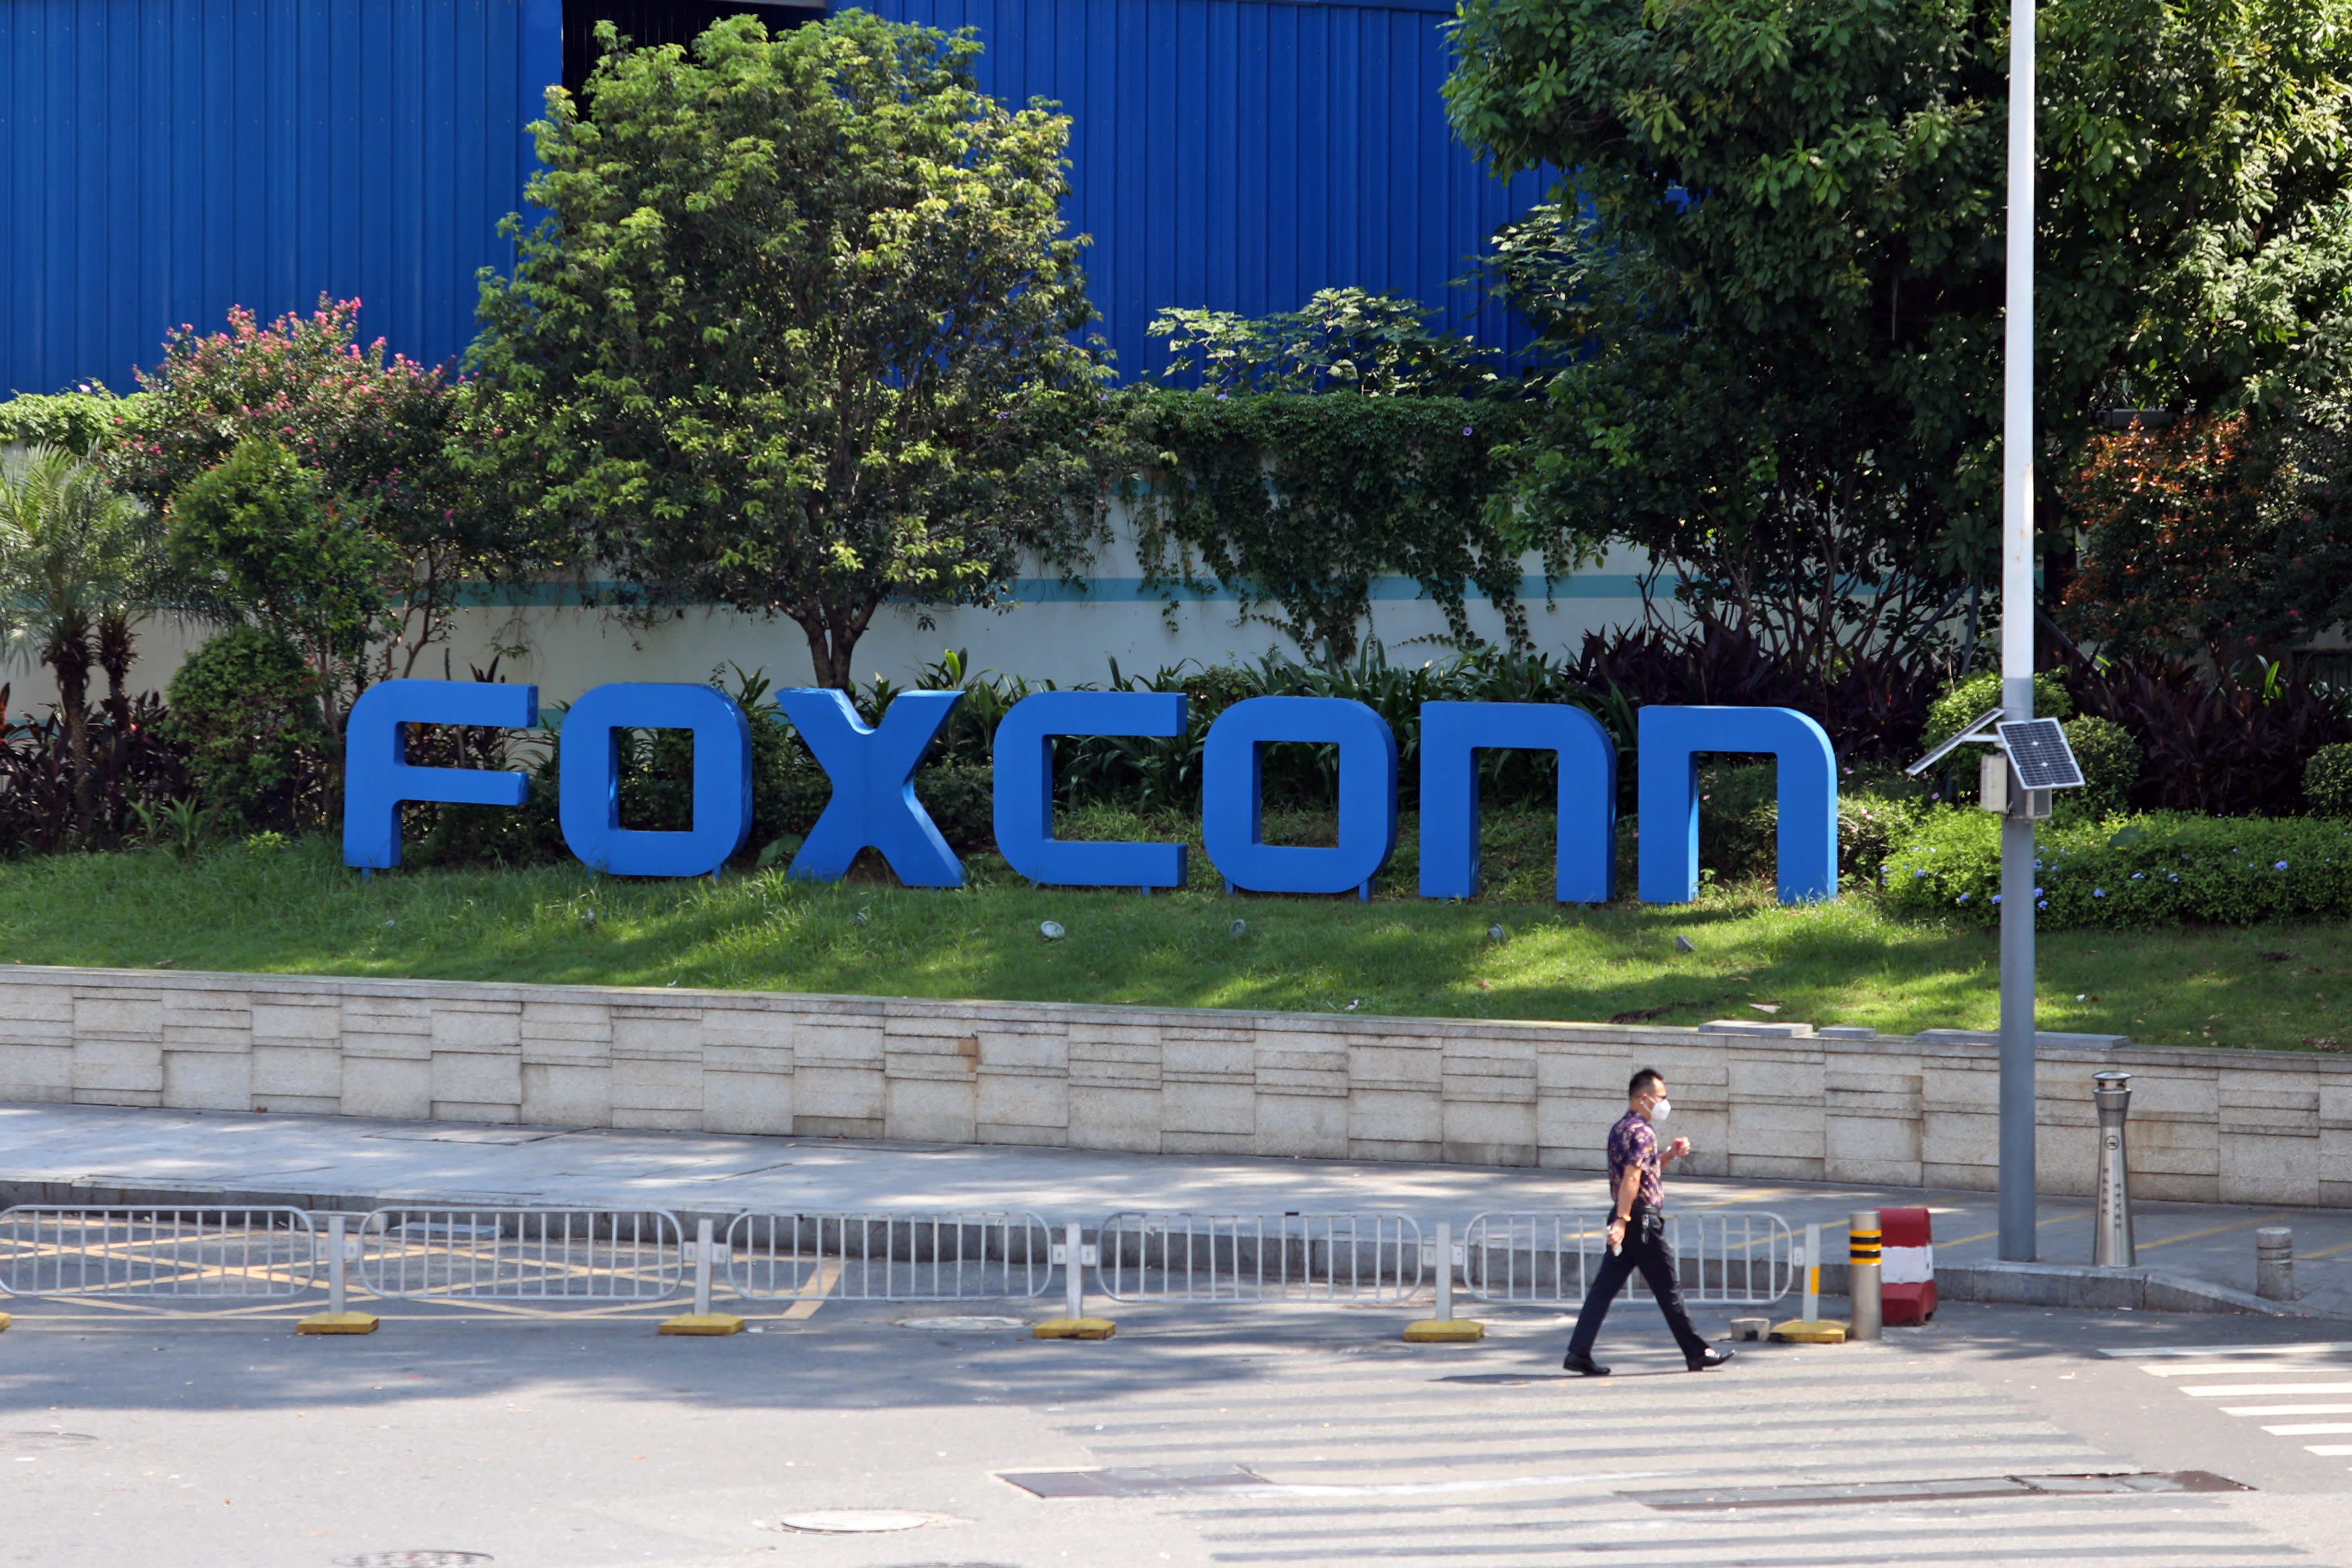 Foxconn, an Apple supplier, claims that manufacturing capacity at its expansive site in central China, which has been impacted by Covid-19 limitations and worker protests since October, is "gradually" being restored.